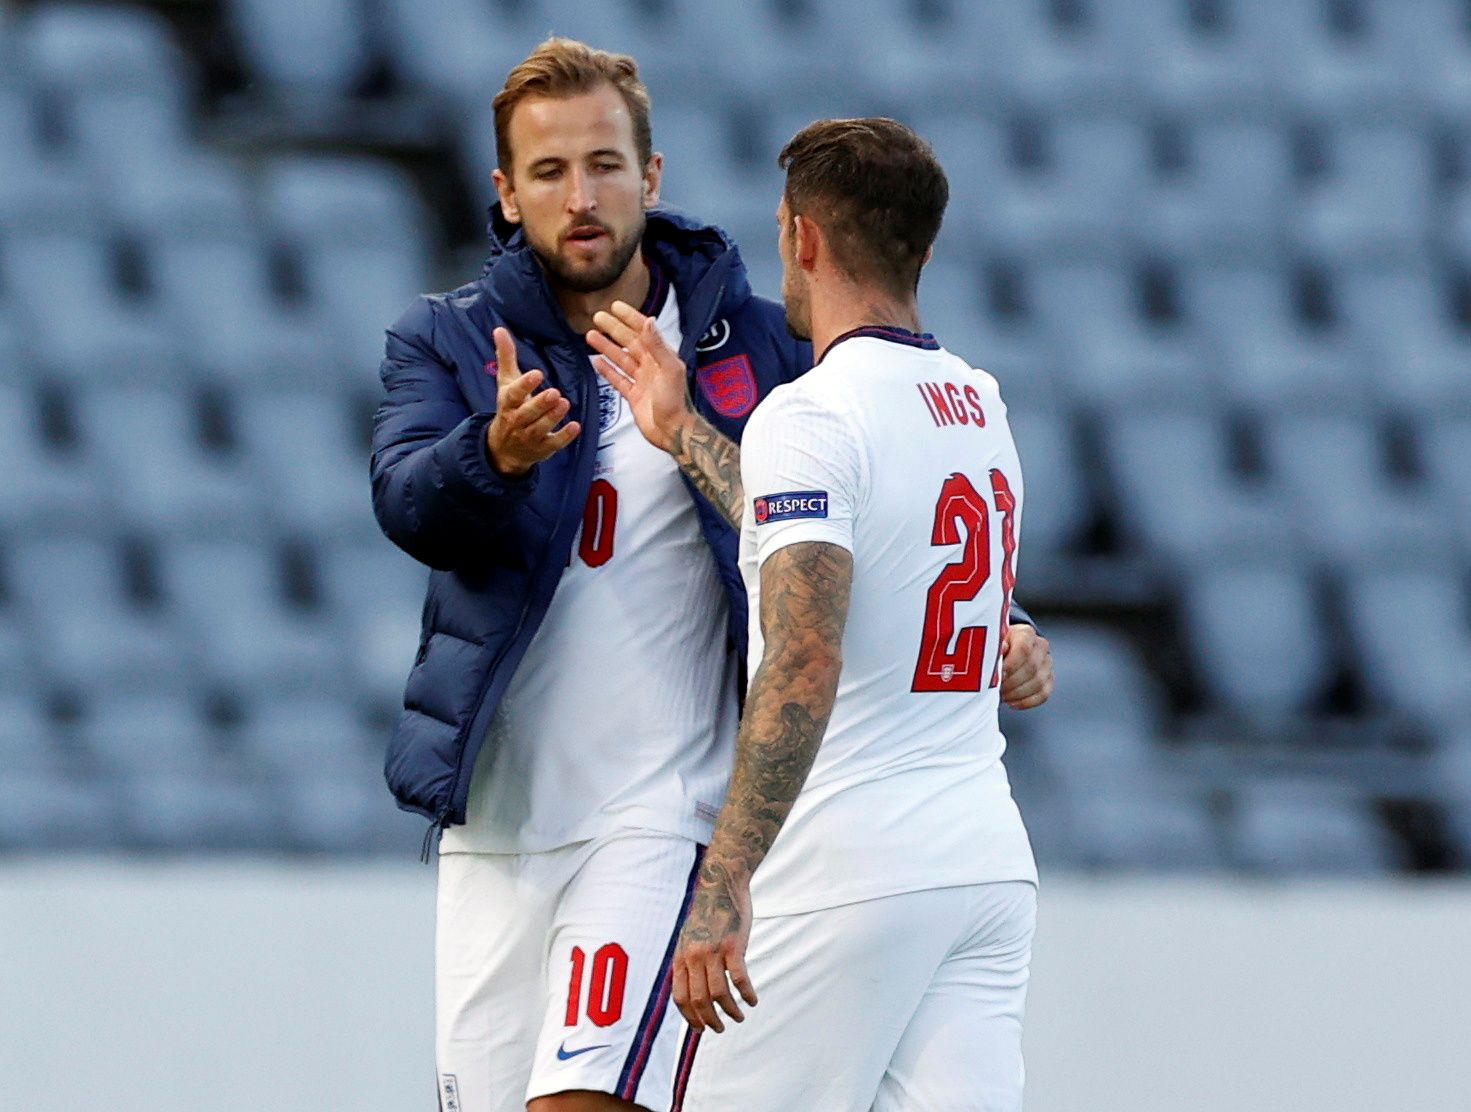 Soccer Football - UEFA Nations League - League A - Group 2 - Iceland v England - Laugardalsvollur, Reykjavik, Iceland - September 5, 2020  England's Harry Kane and Danny Ings celebrate after the match  REUTERS/John Sibley